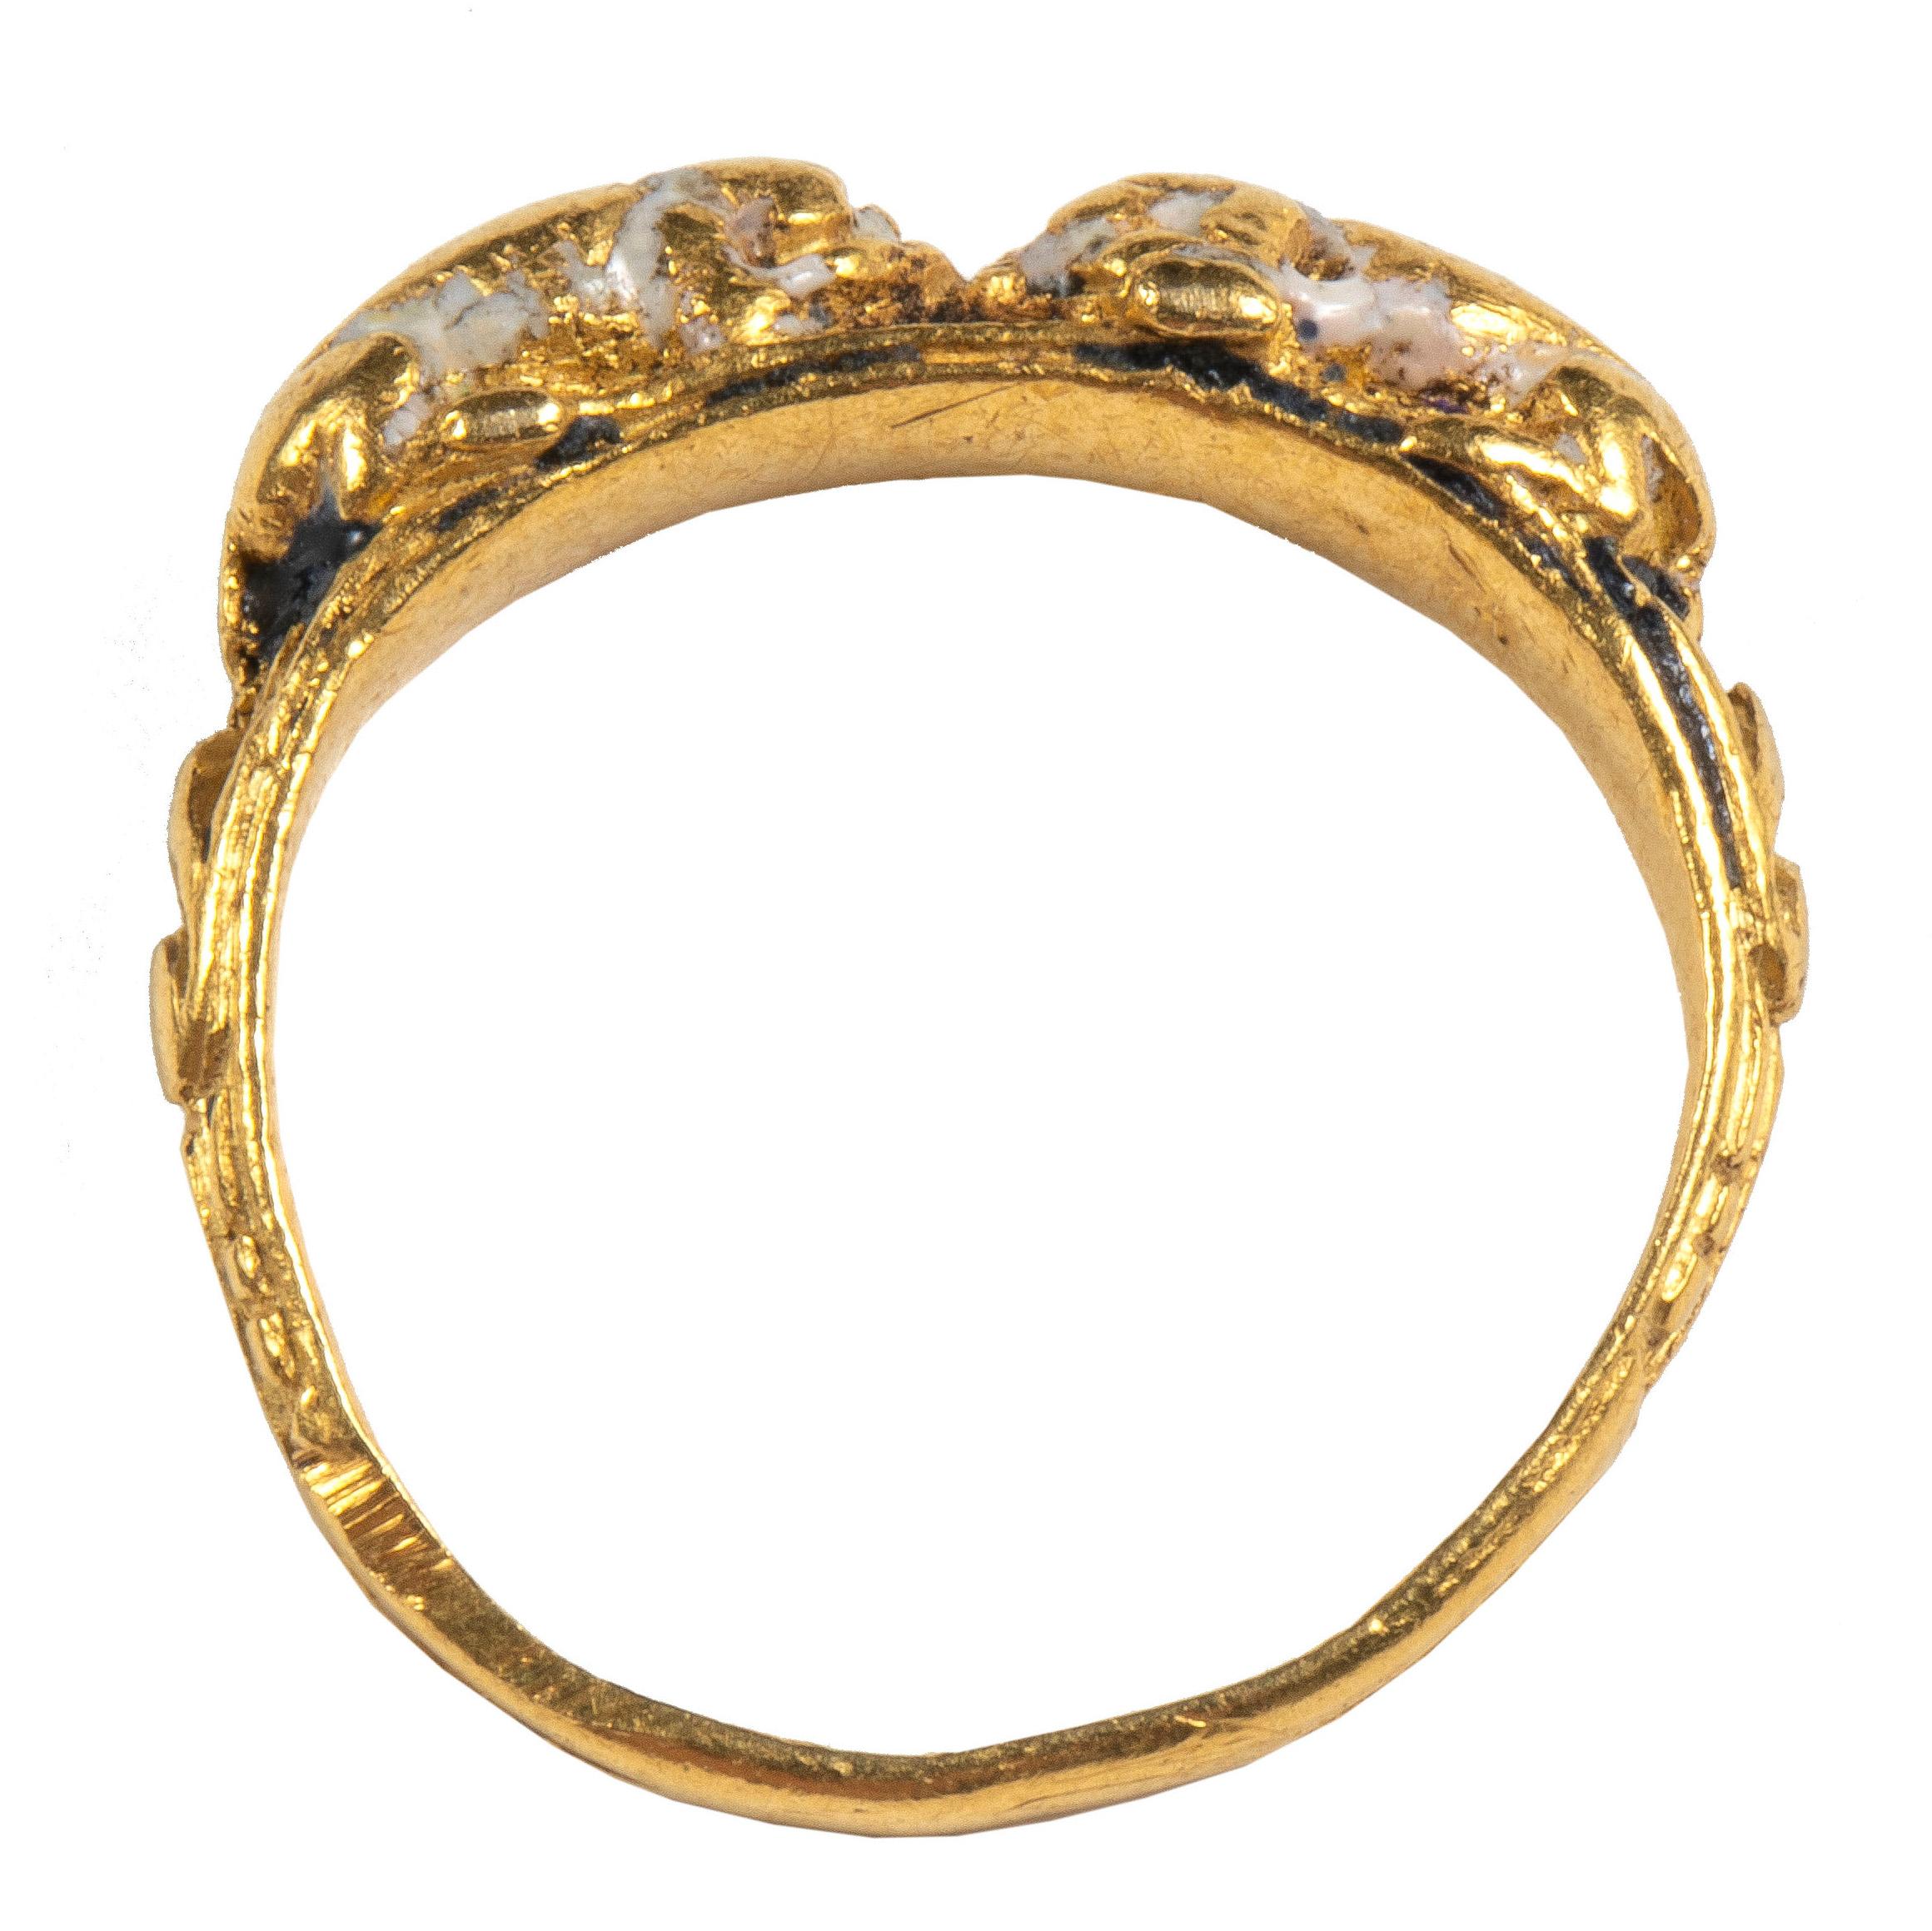 Renaissance Ring
Western Europe, likely Italy, mid-16th c.
Gold and traces of black and white enamel
Bezel 15 x 3 x 4 mm.; circumference 42 mm.; weight 2.7 gr.; US size 2 ¼; UK size D ½

Thin circular hoop, soldered with a second hoop sculpted in